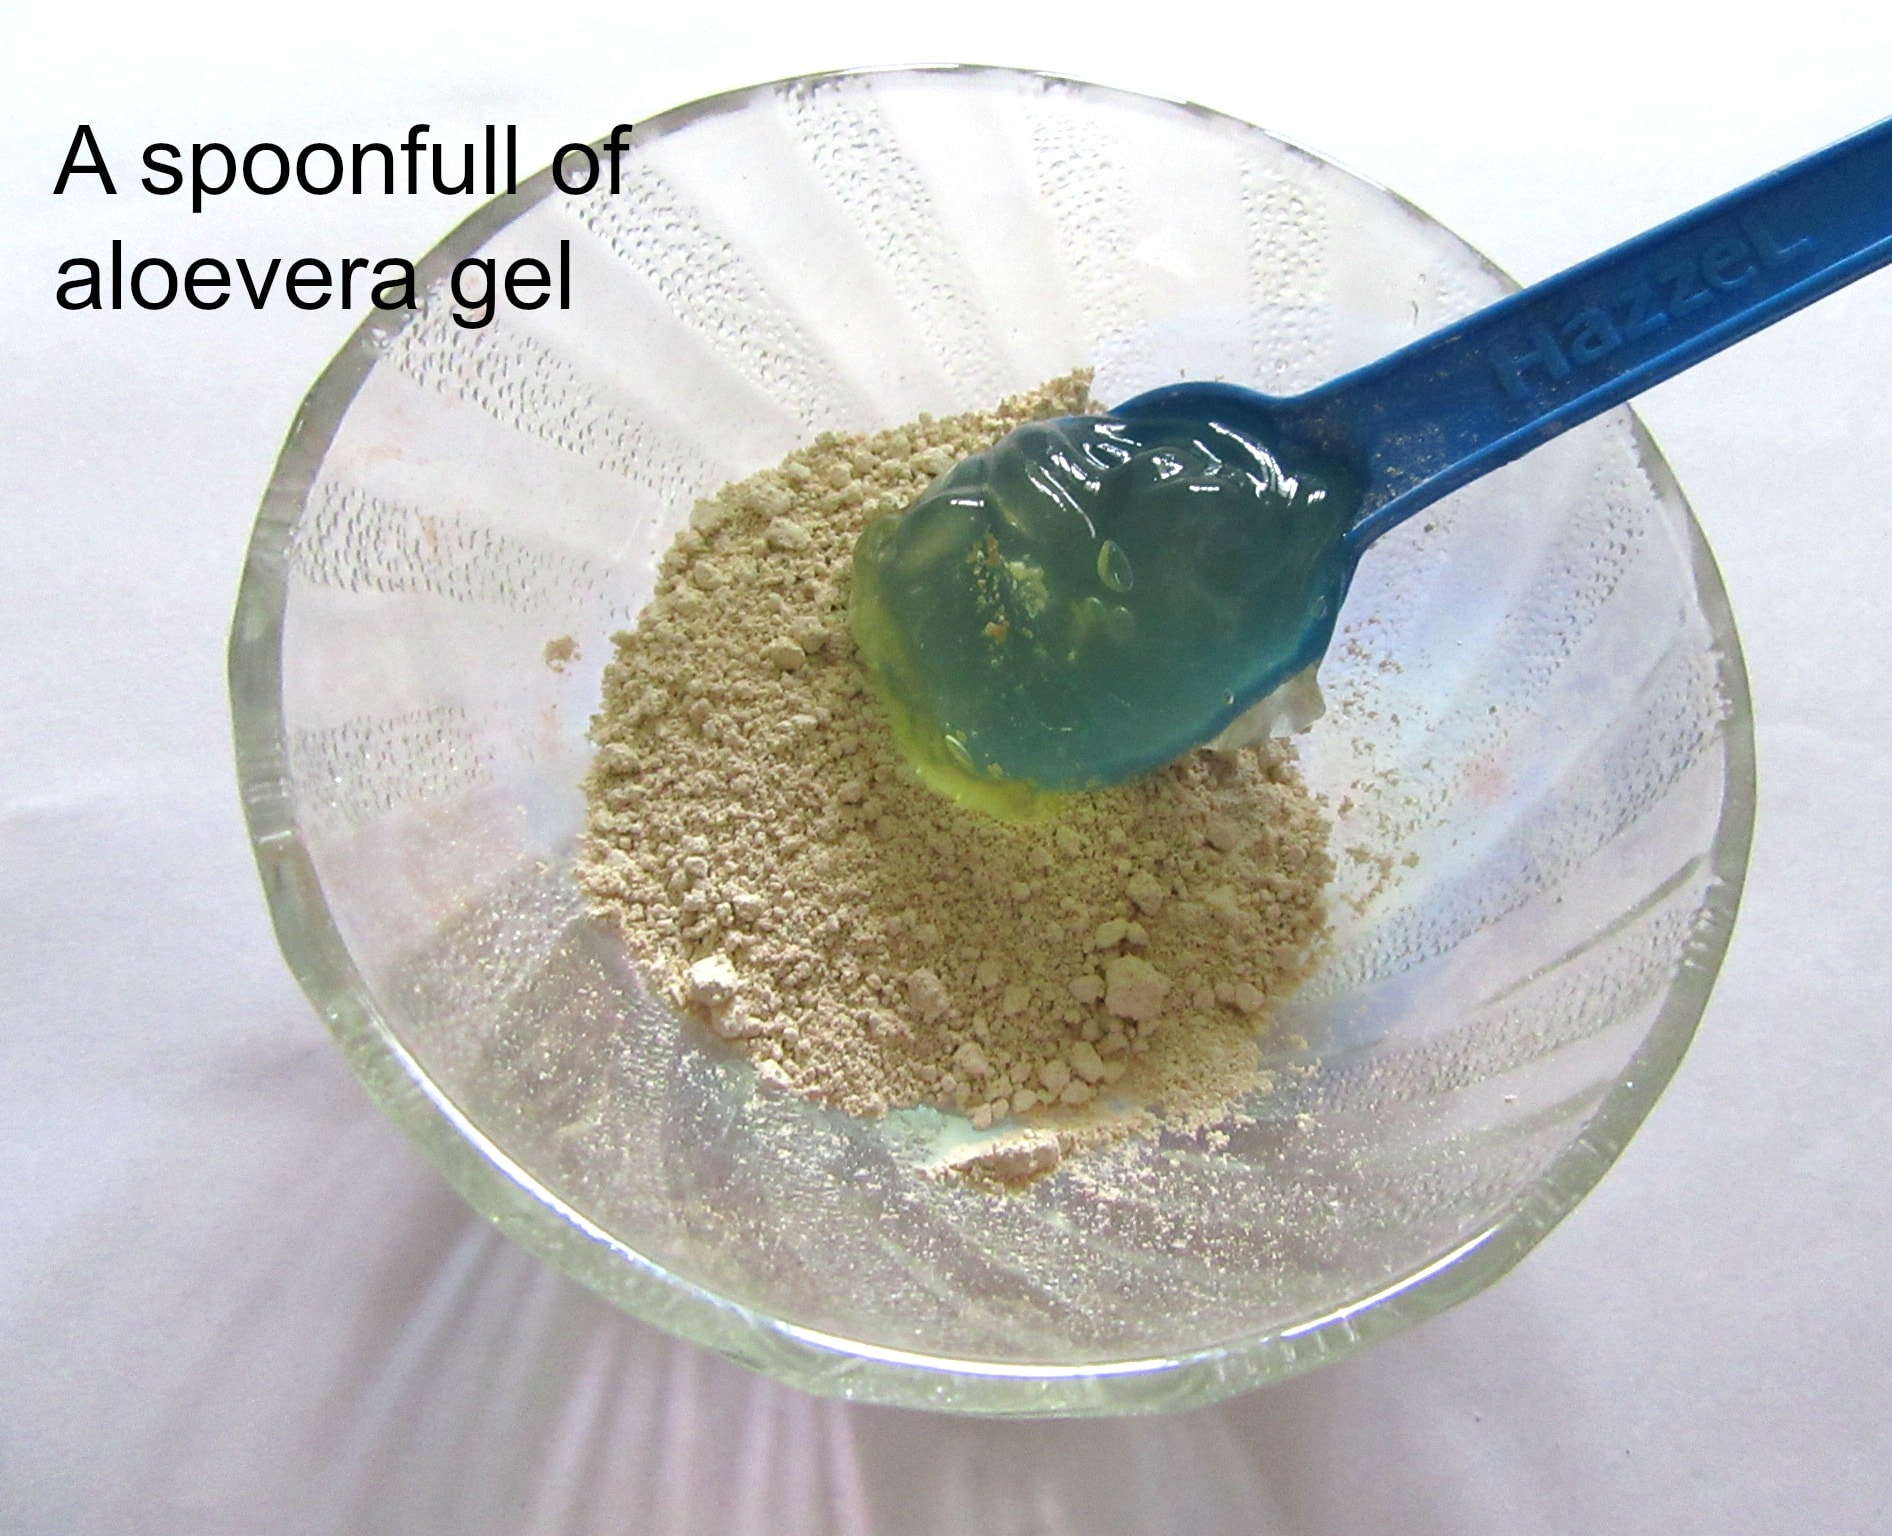 DIY Face Pack for Instant Brightening